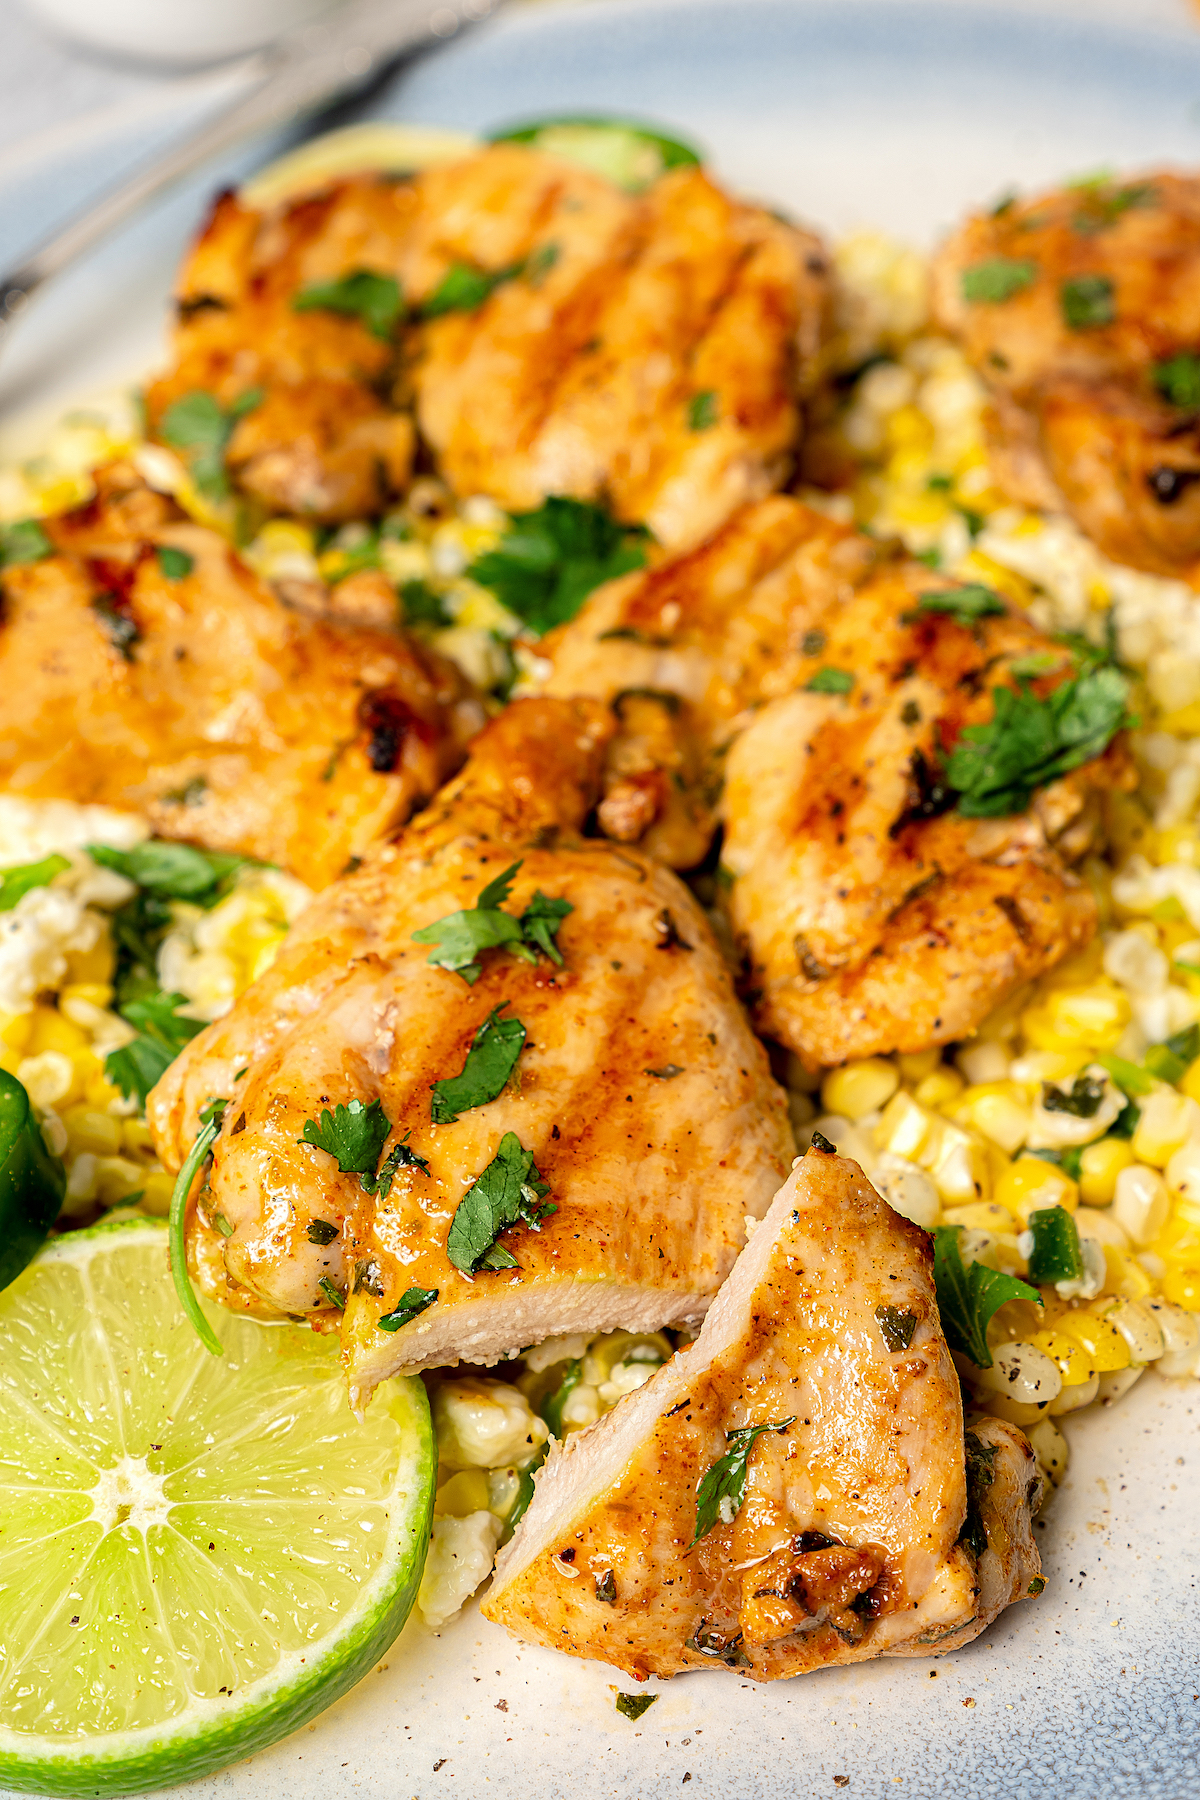 Chicken and Mexican street corn garnished with lime slices and cilantro.